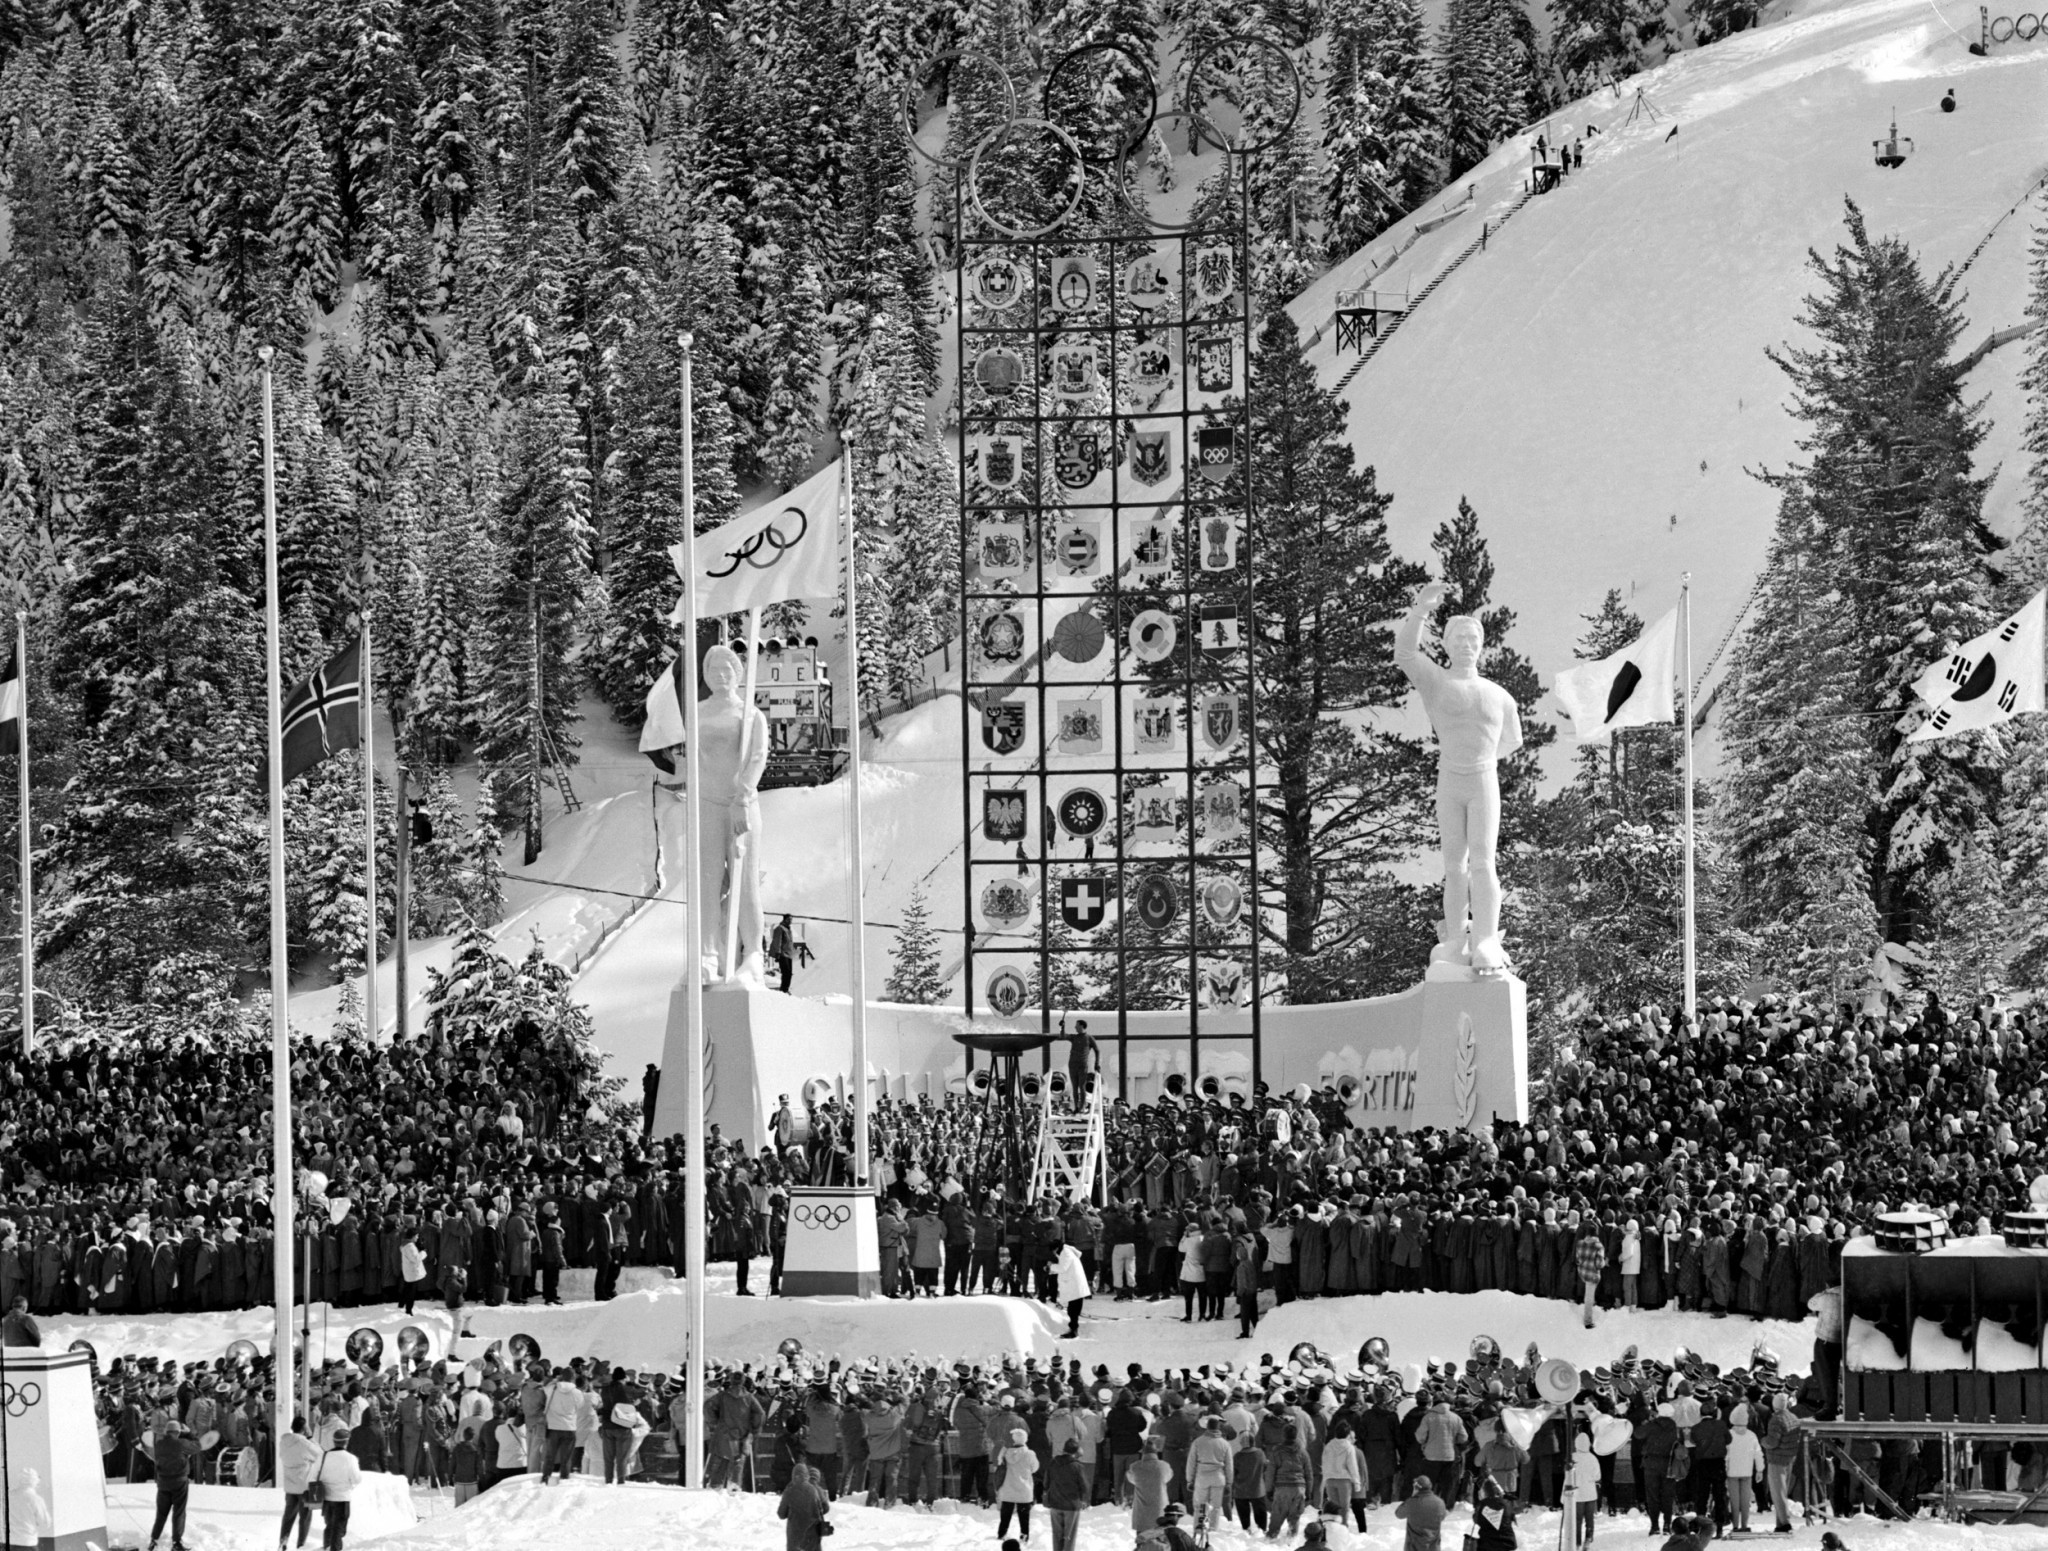 The Olympic flame is lit at Squaw Valley ©Getty Images